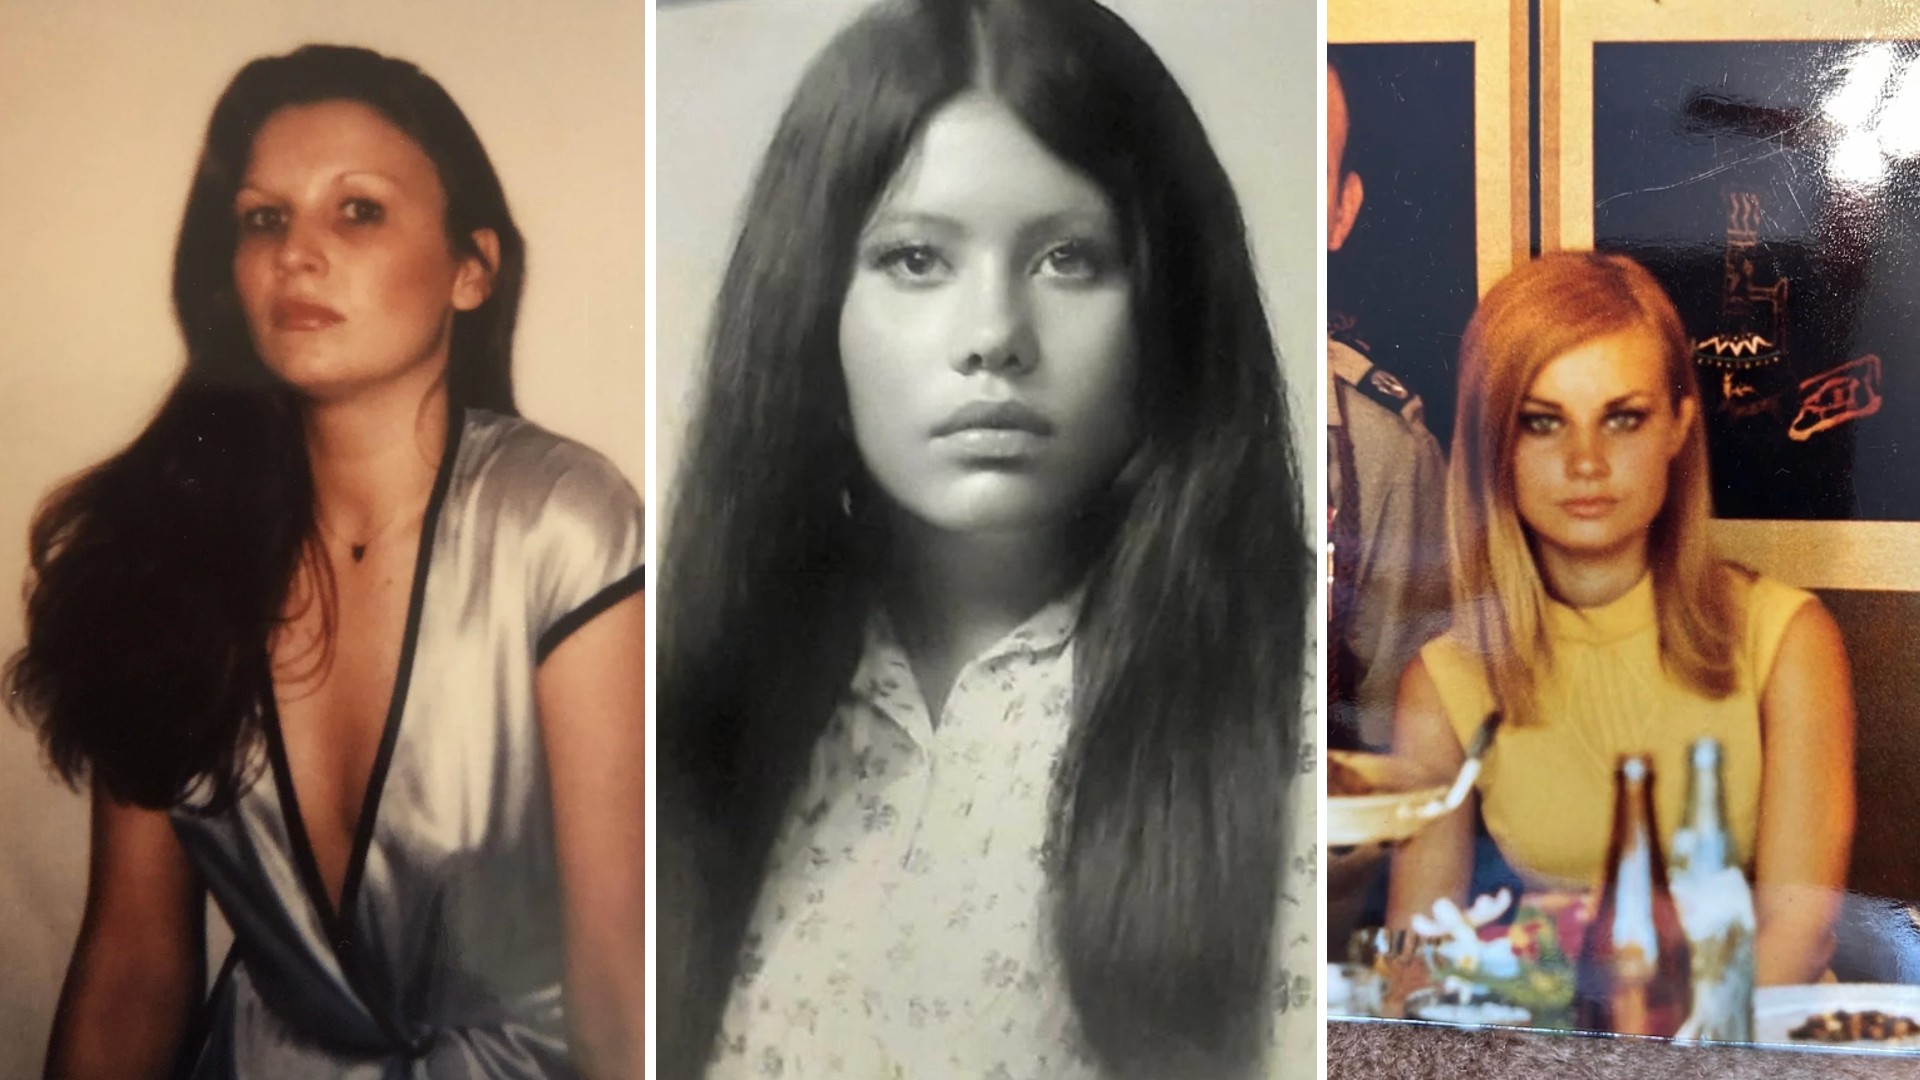 A collage of three photos of a woman: the left image shows her with long, dark hair, wearing a silver top; the middle is a black-and-white portrait, with her hair down and wearing a floral shirt; the right depicts her with lighter hair, seated at a table.